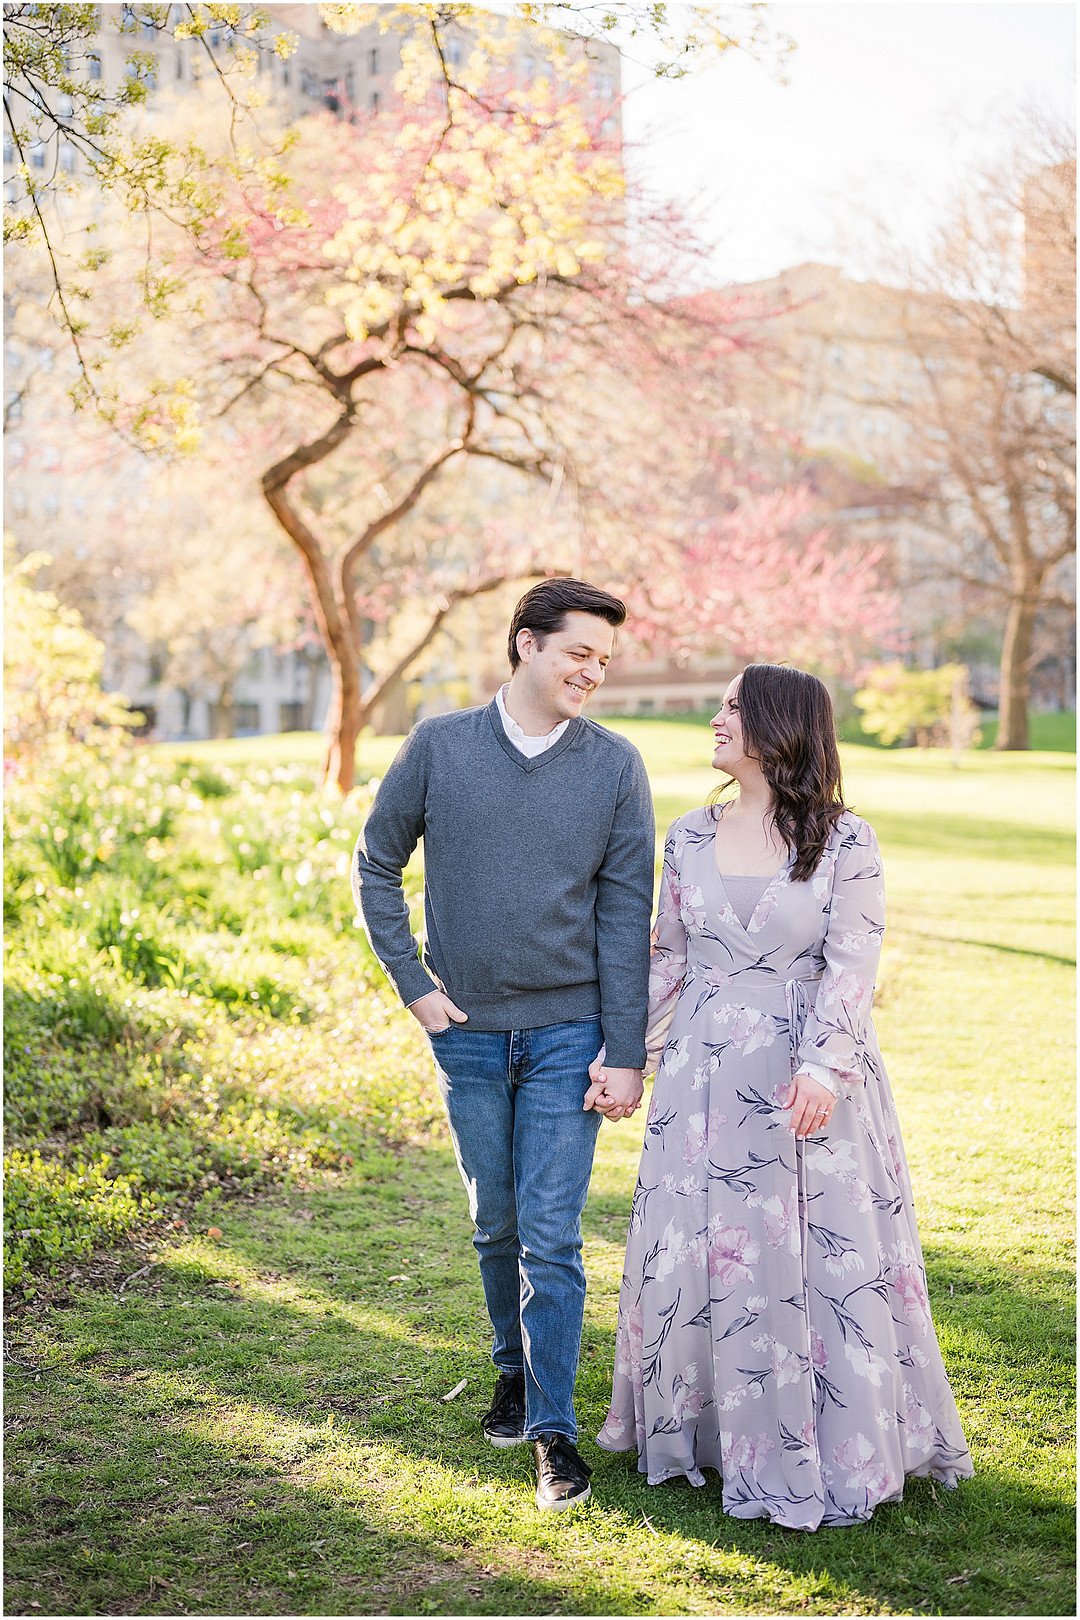 shoemaker_WitKowski_Winterlyn Photography_Lincoln Park Chicago Engagement _0198_low.jpg